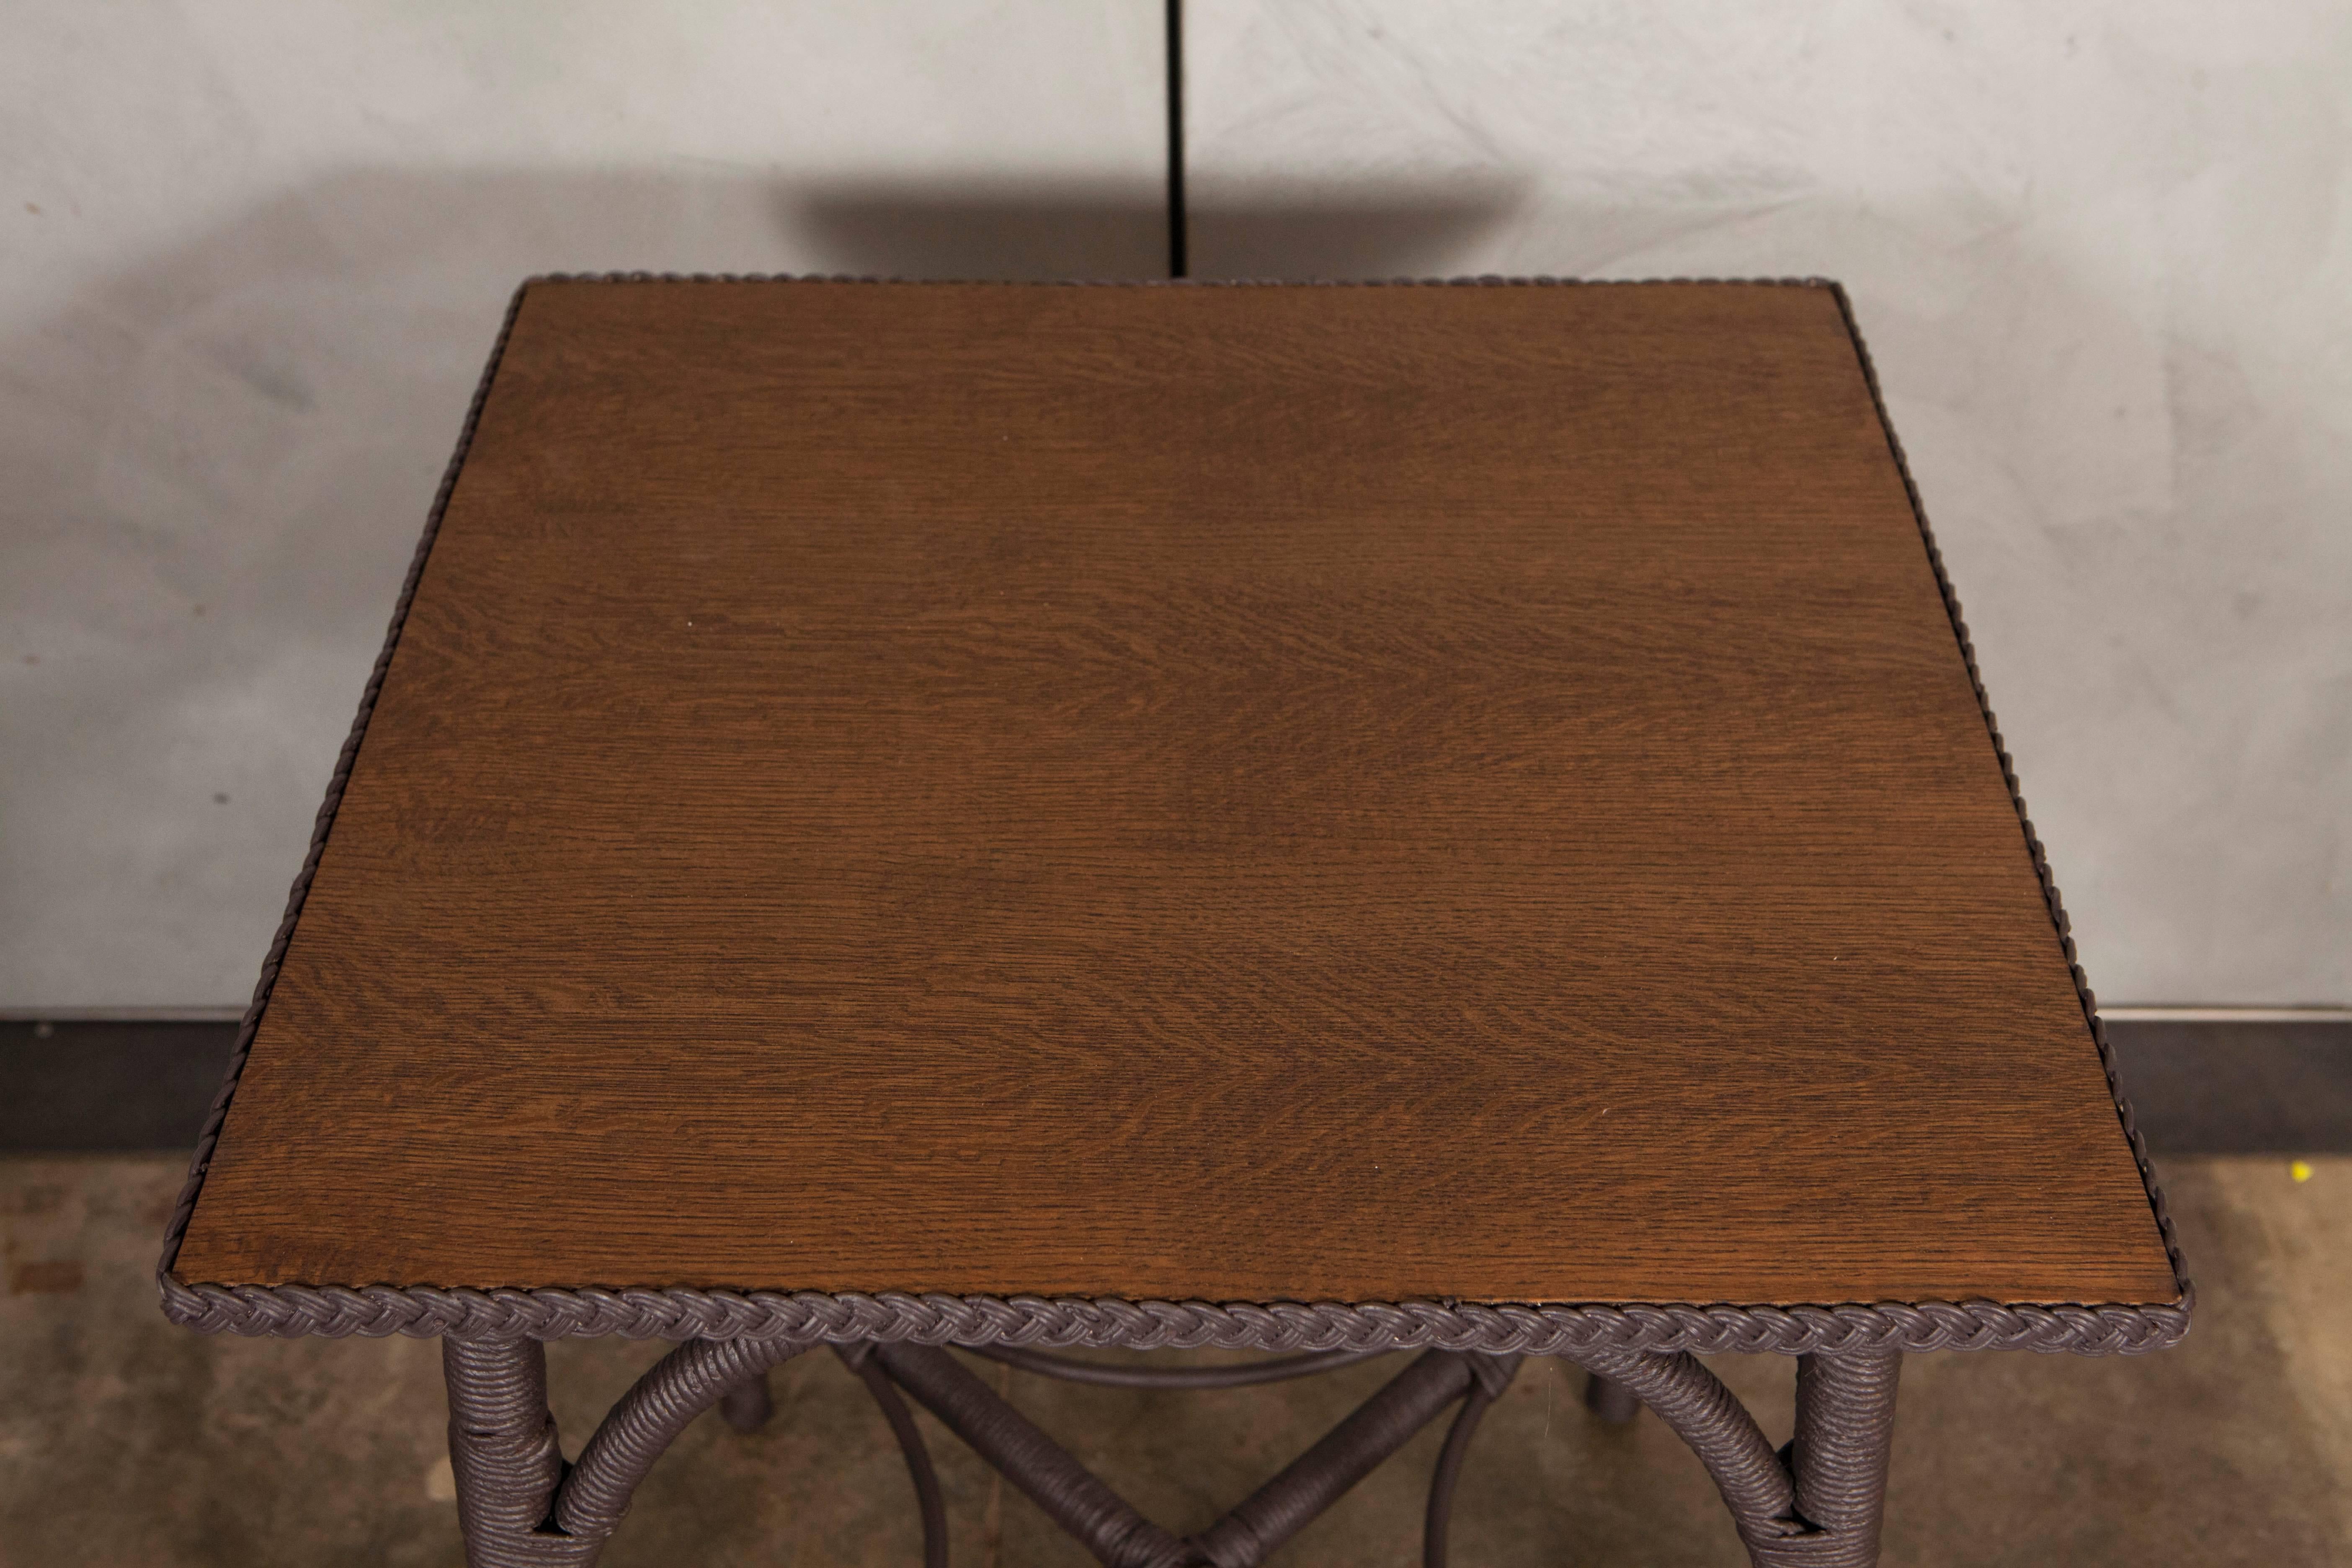 This small table with an oak veneer top is a beautiful example of Lloyd Loom Furniture made in the United States in the early part of the 20th century. Lloyd Loom furniture was the invention of American, Marshall B. Lloyd who developed a method to